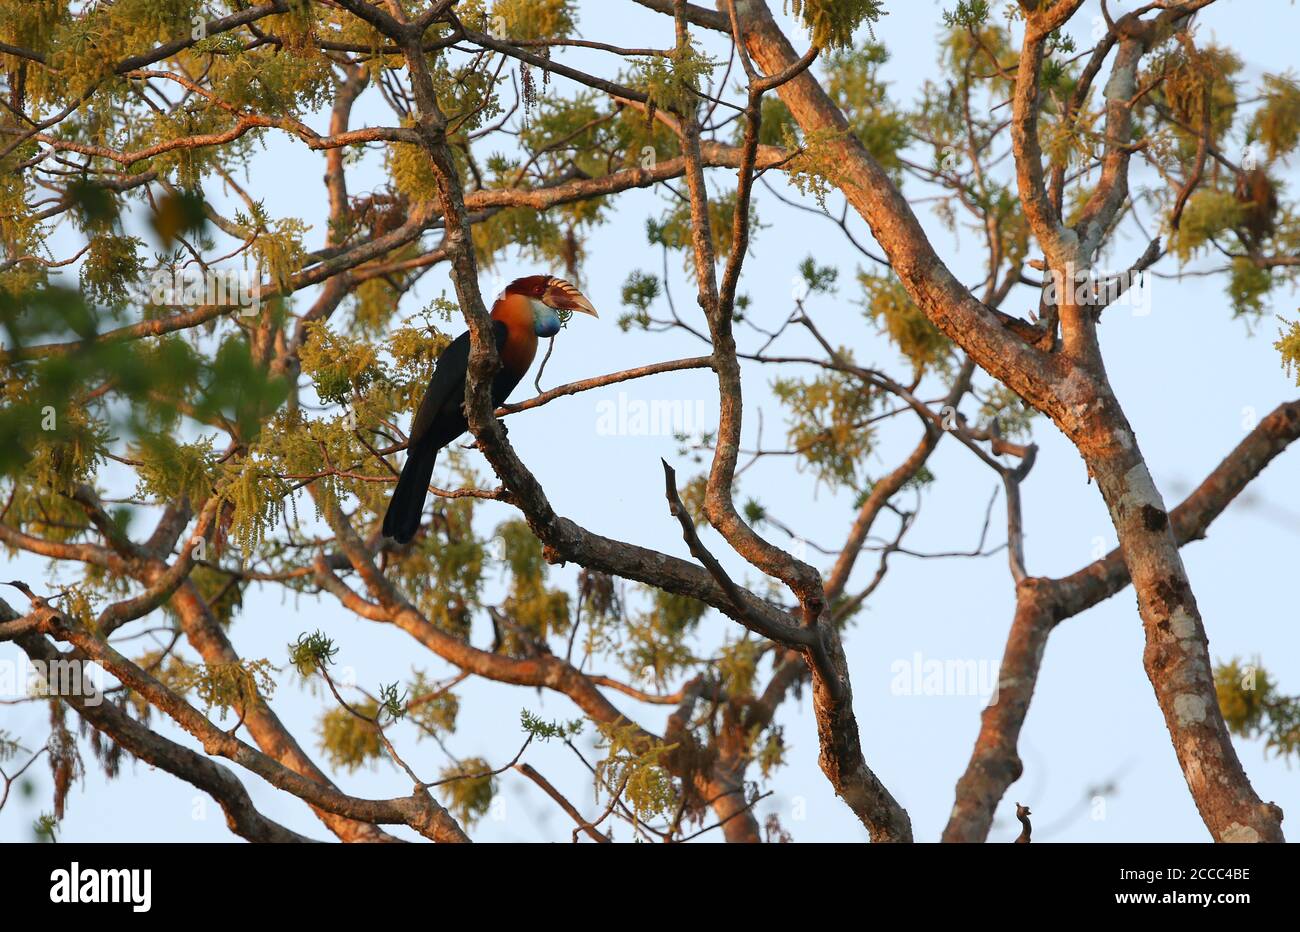 Sumba Hornbill (Rhyticeros everetti) on the island Sumba in the Lesser Sundas, Indonesia. Perched on a branch in a tall tree. Stock Photo